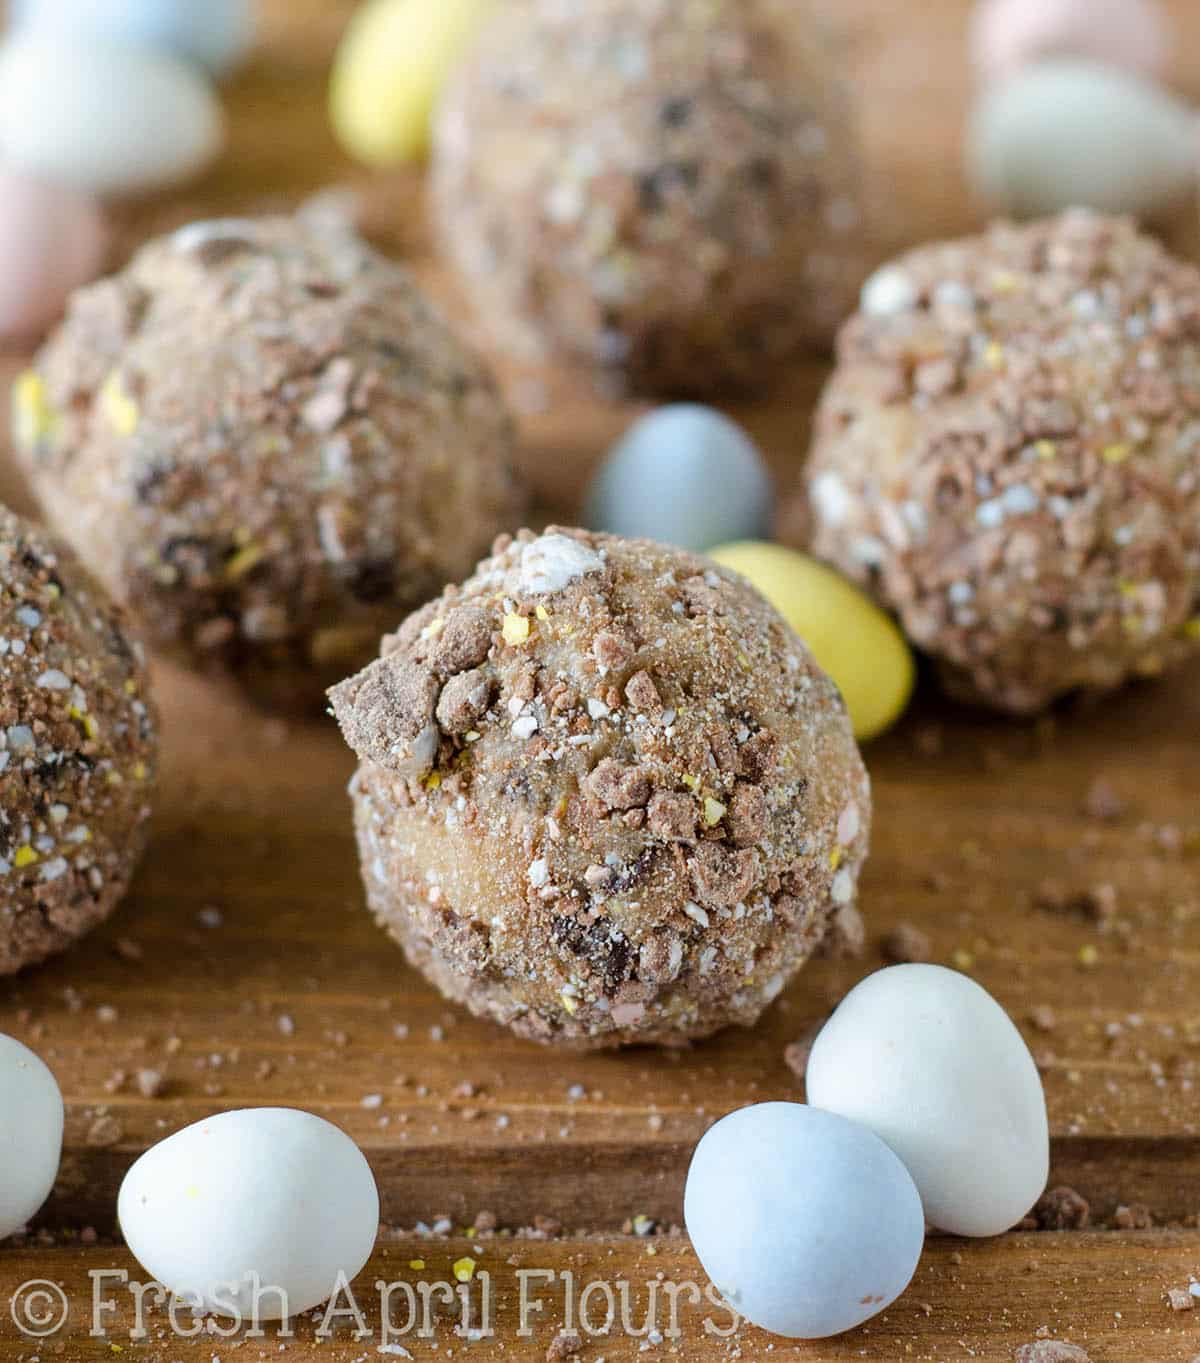 Chocolate Chip Mini Egg Cookie Dough Bites: Eggless and safe-to-eat chocolate chip cookie dough balls filled and coated with crunchy pieces of Cadbury Mini Eggs. The perfect treat for Easter!